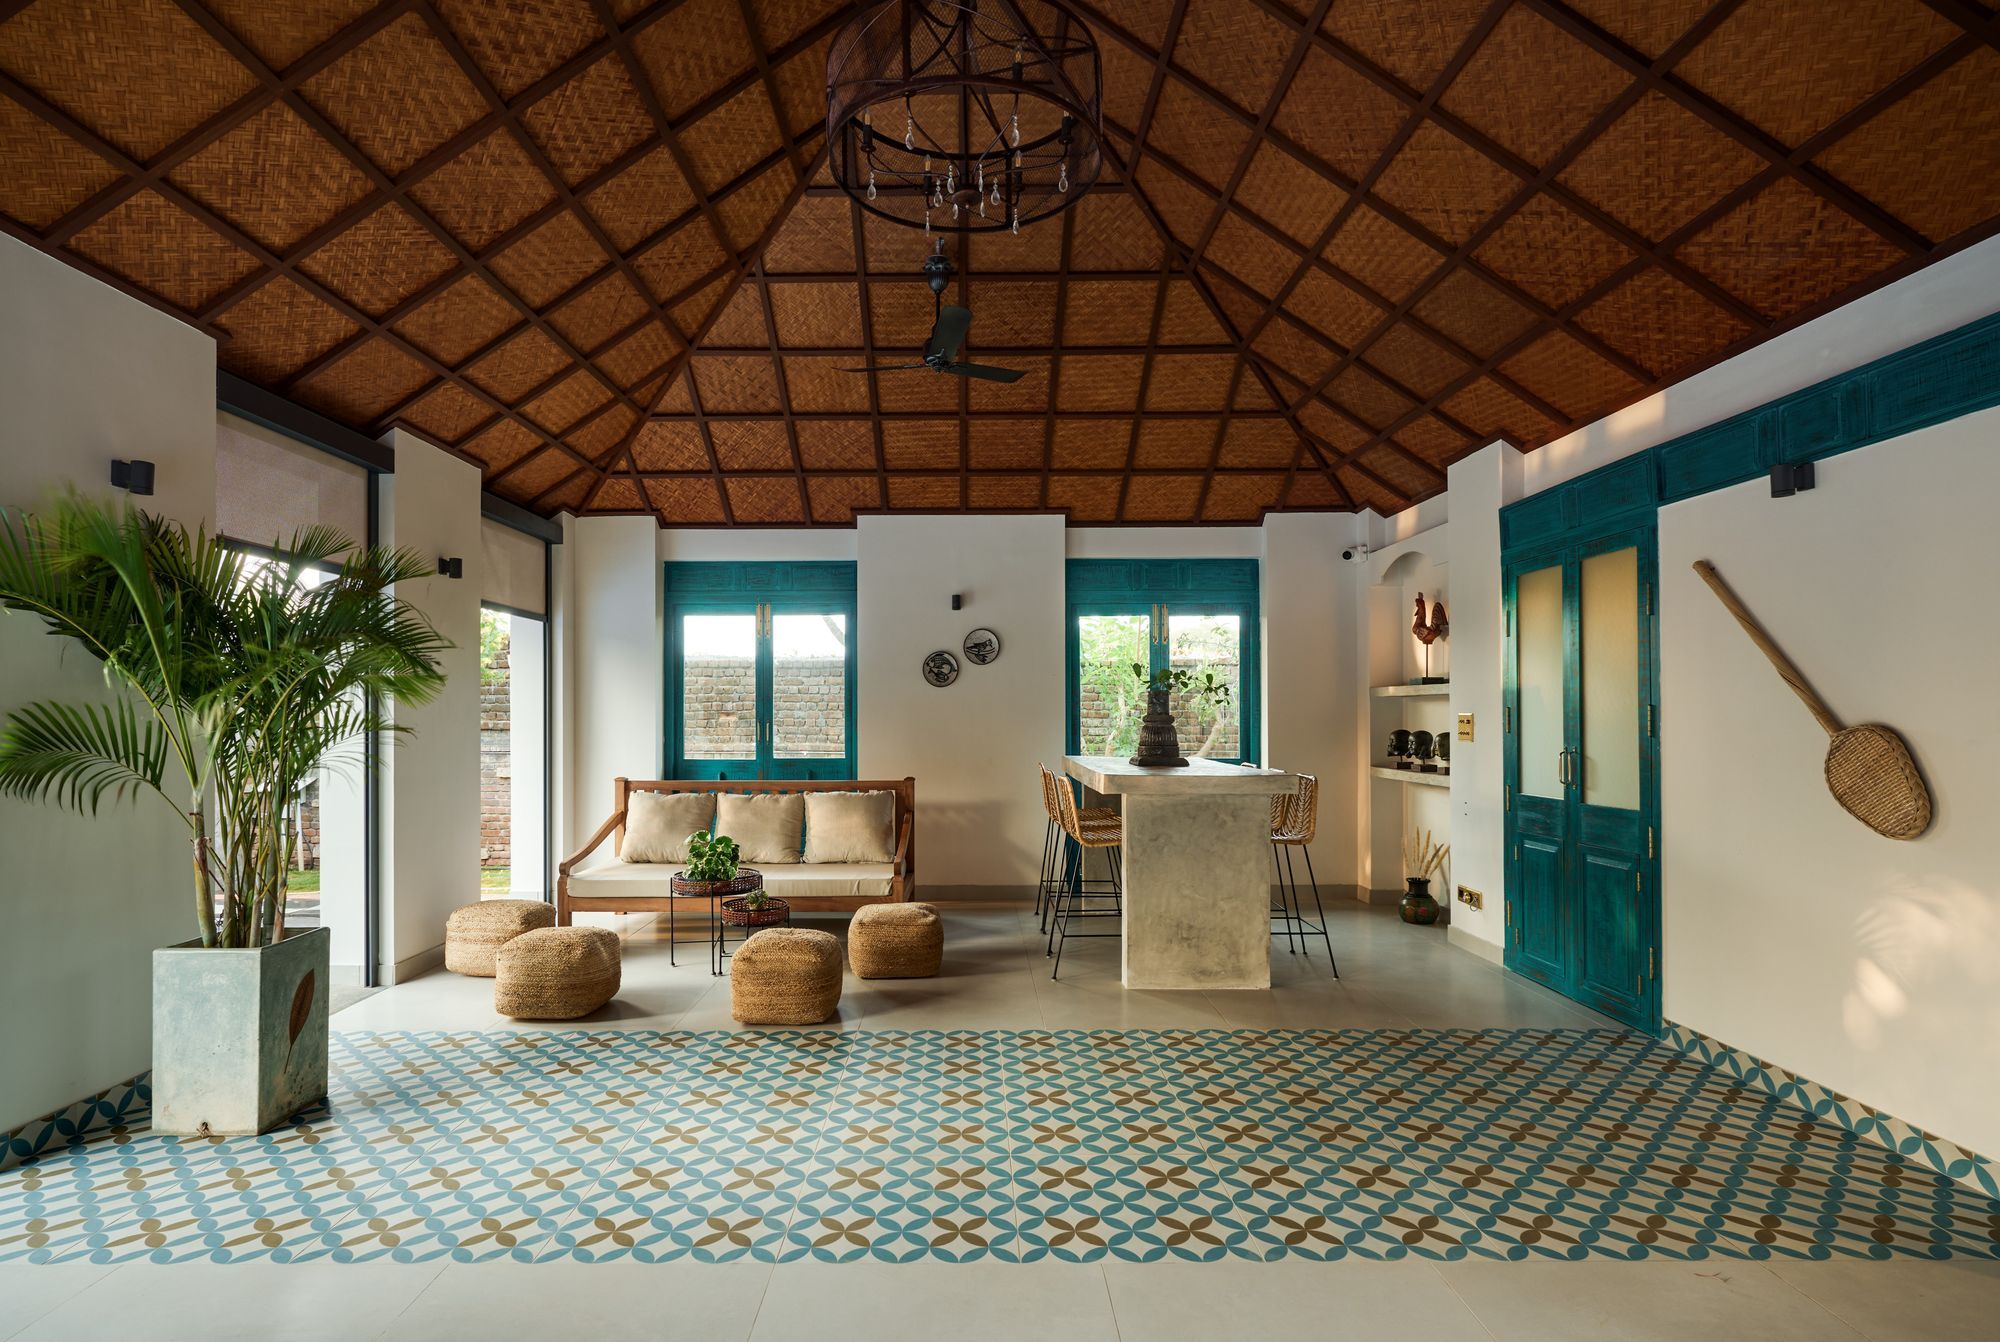 Designer Transforms A Gloomy Guesthouse Into A Stunning Beach Home